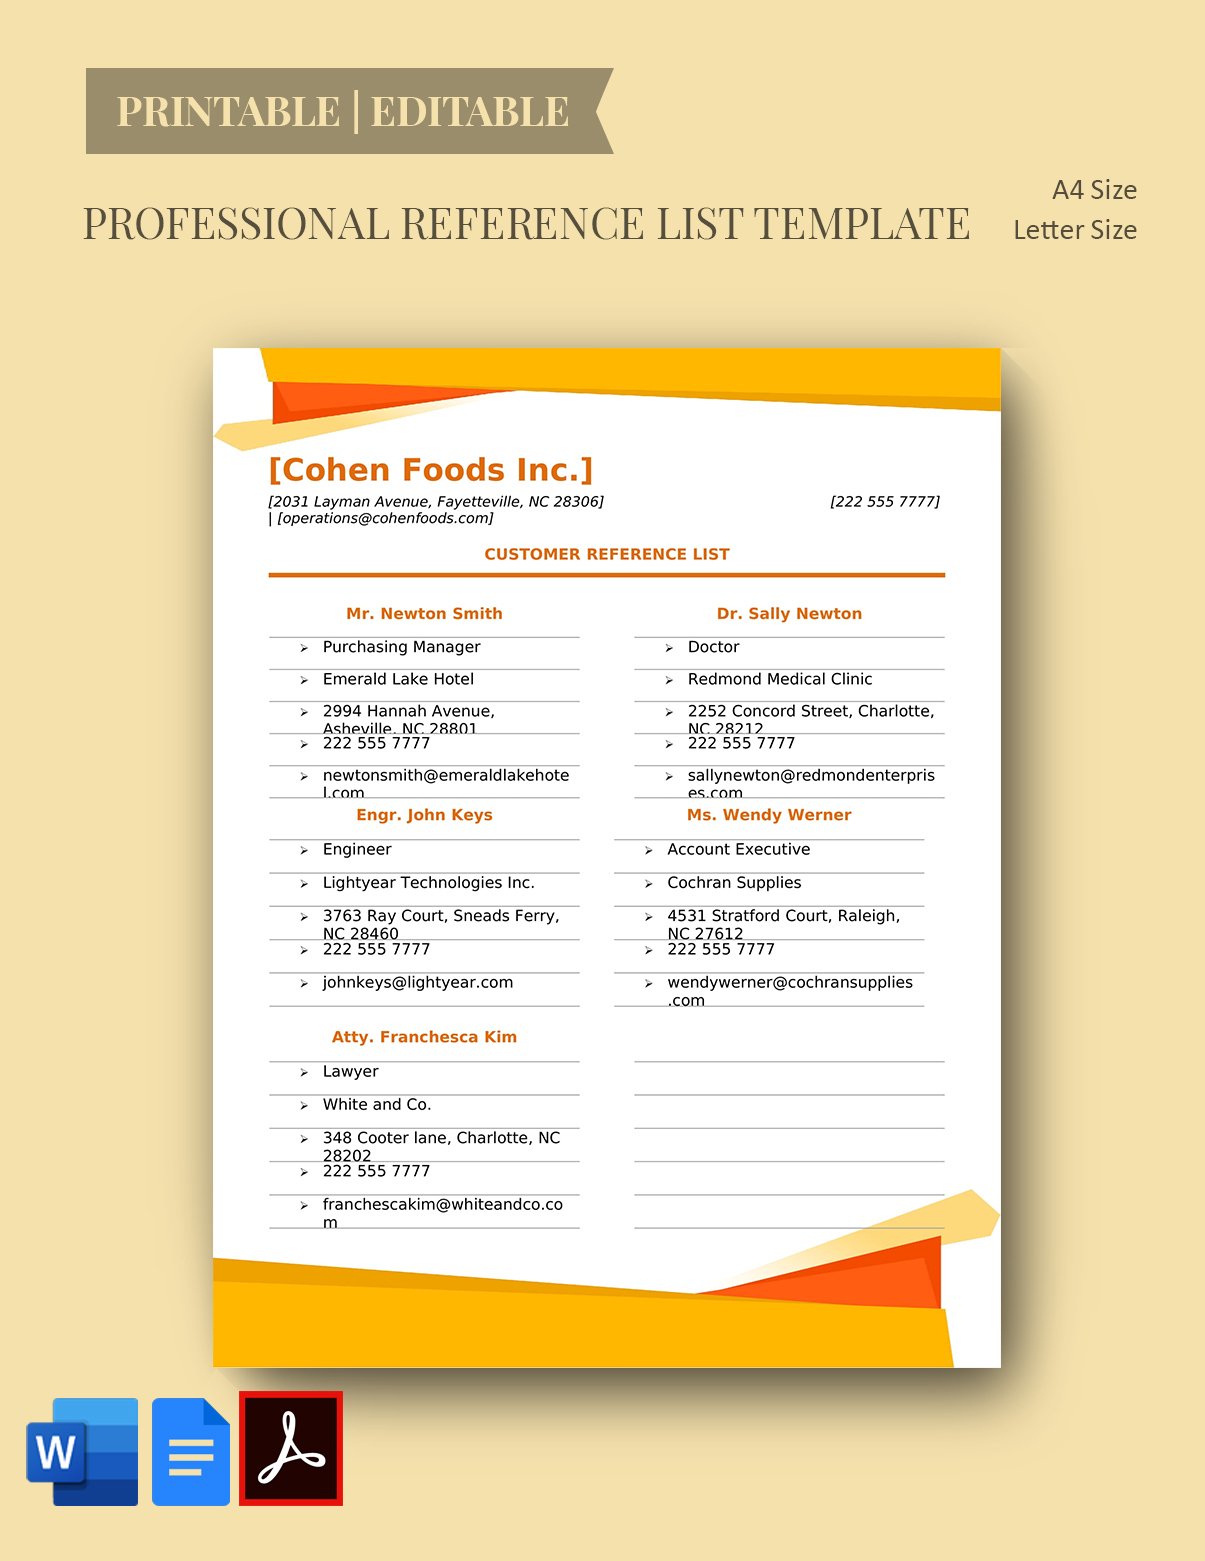 Professional Reference List Template